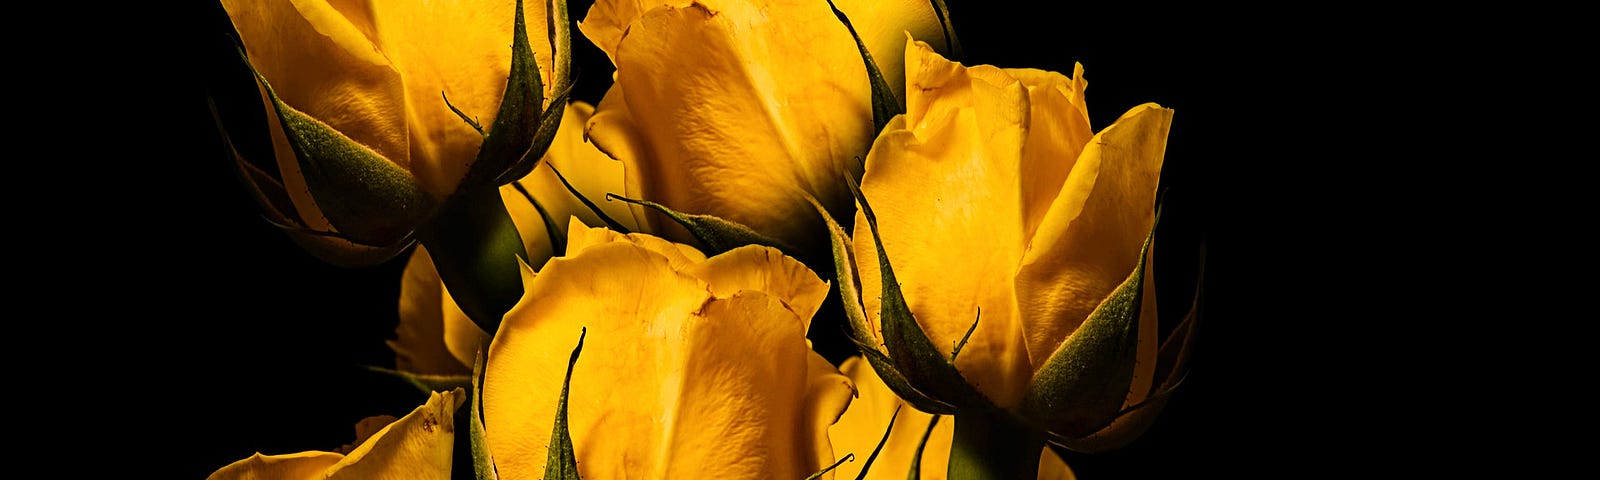 A close-up of a bunch of yellow rose buds against a black background.